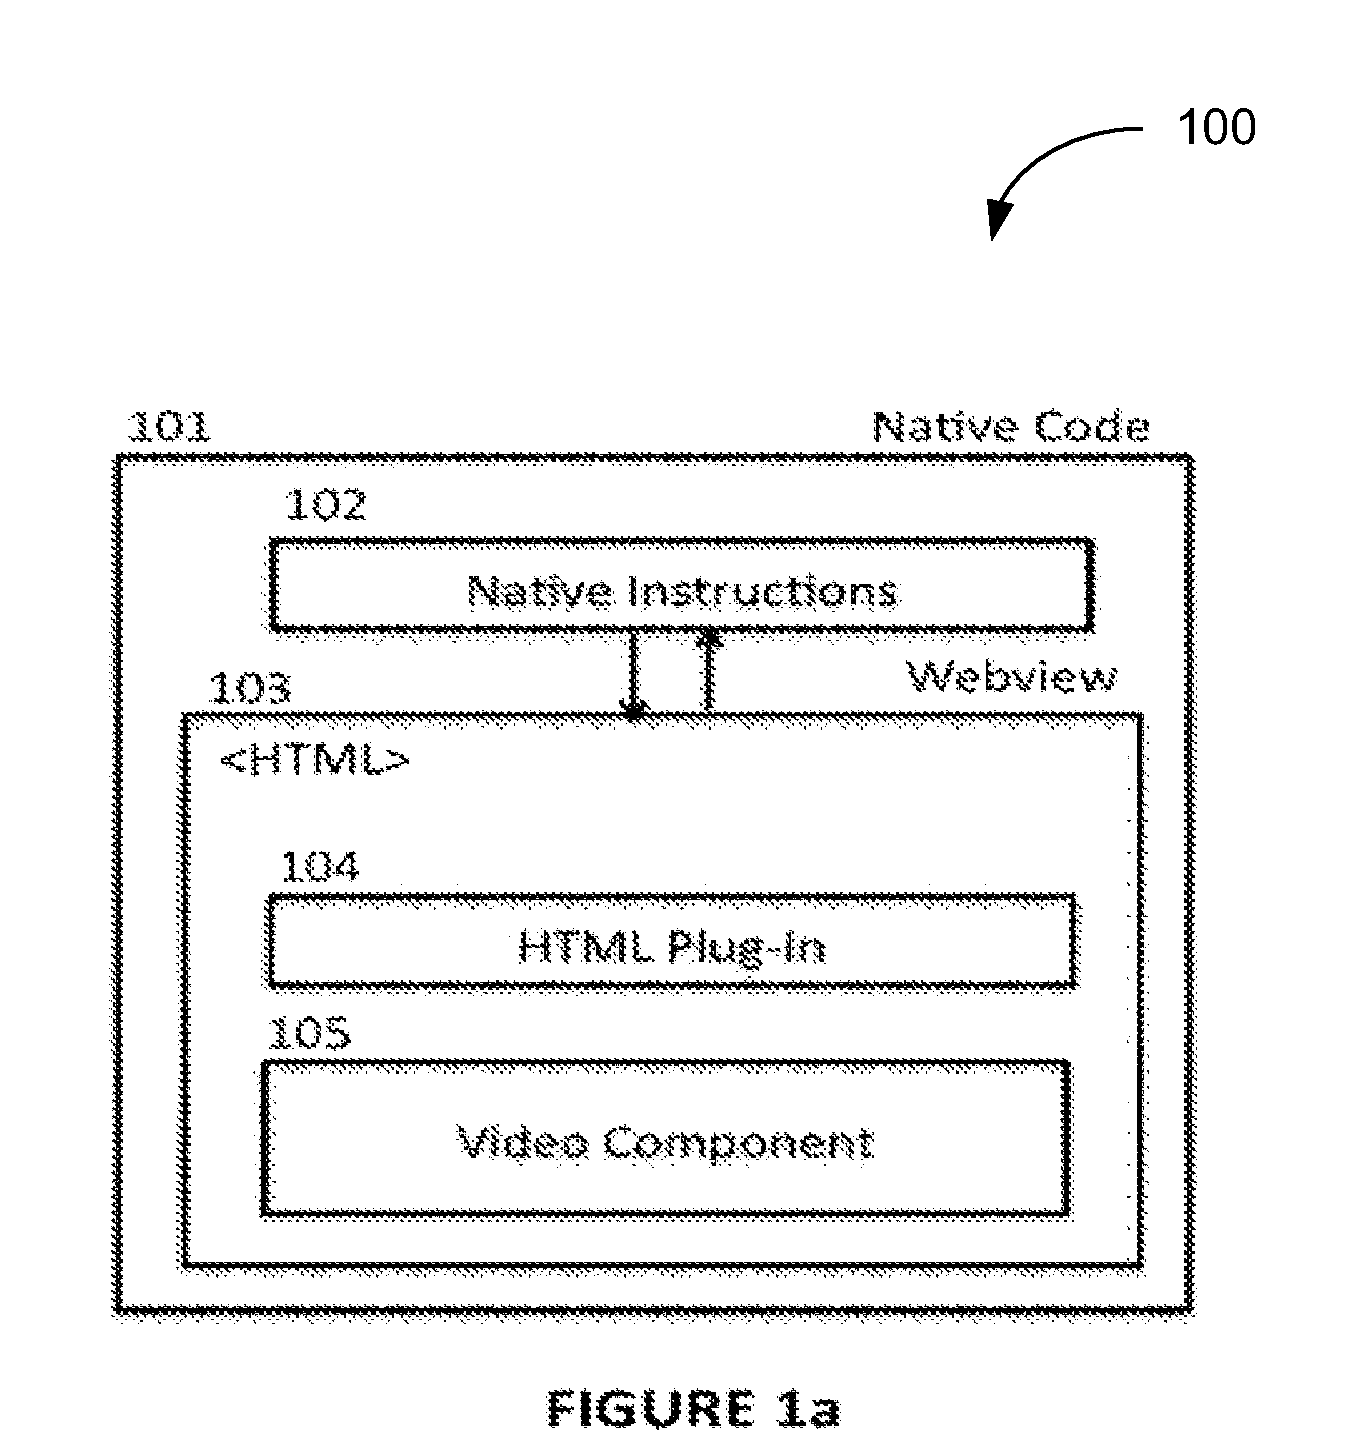 System and method for integrating and controlling web-based HTML players in a native context